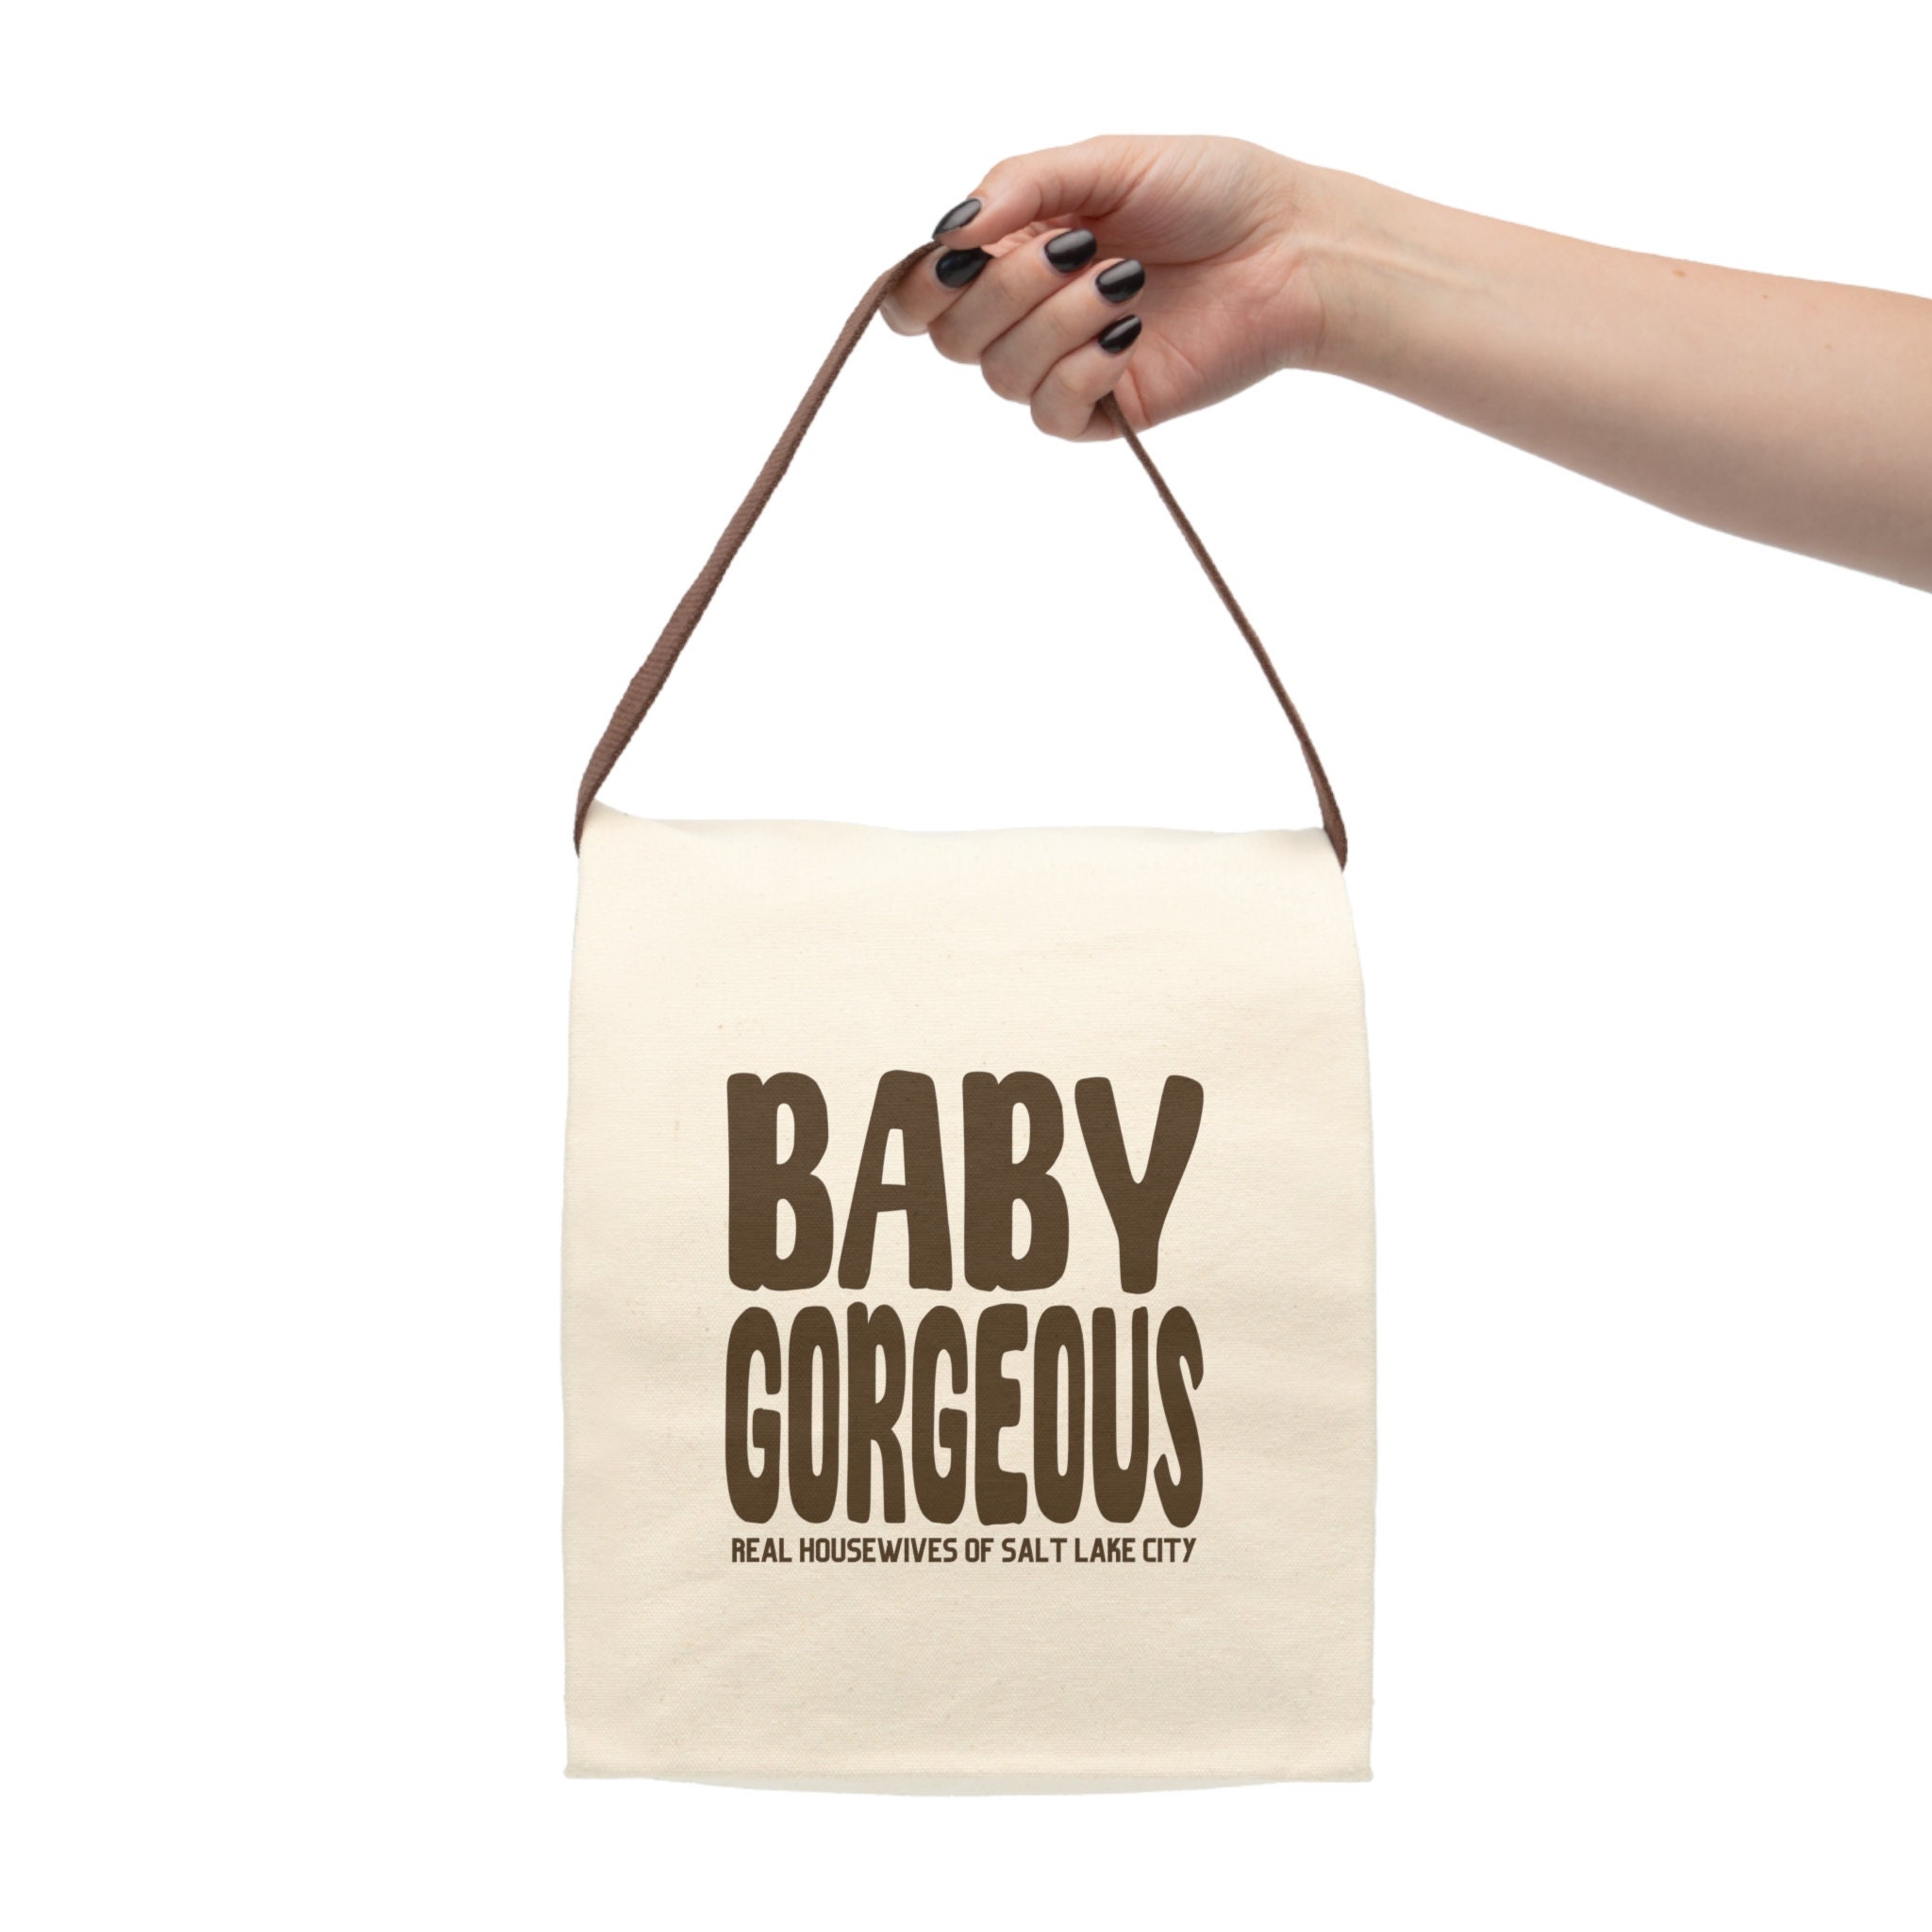 Baby Products Online - Hitiqwe Cute Insulated Lunch Box Lunch Bags